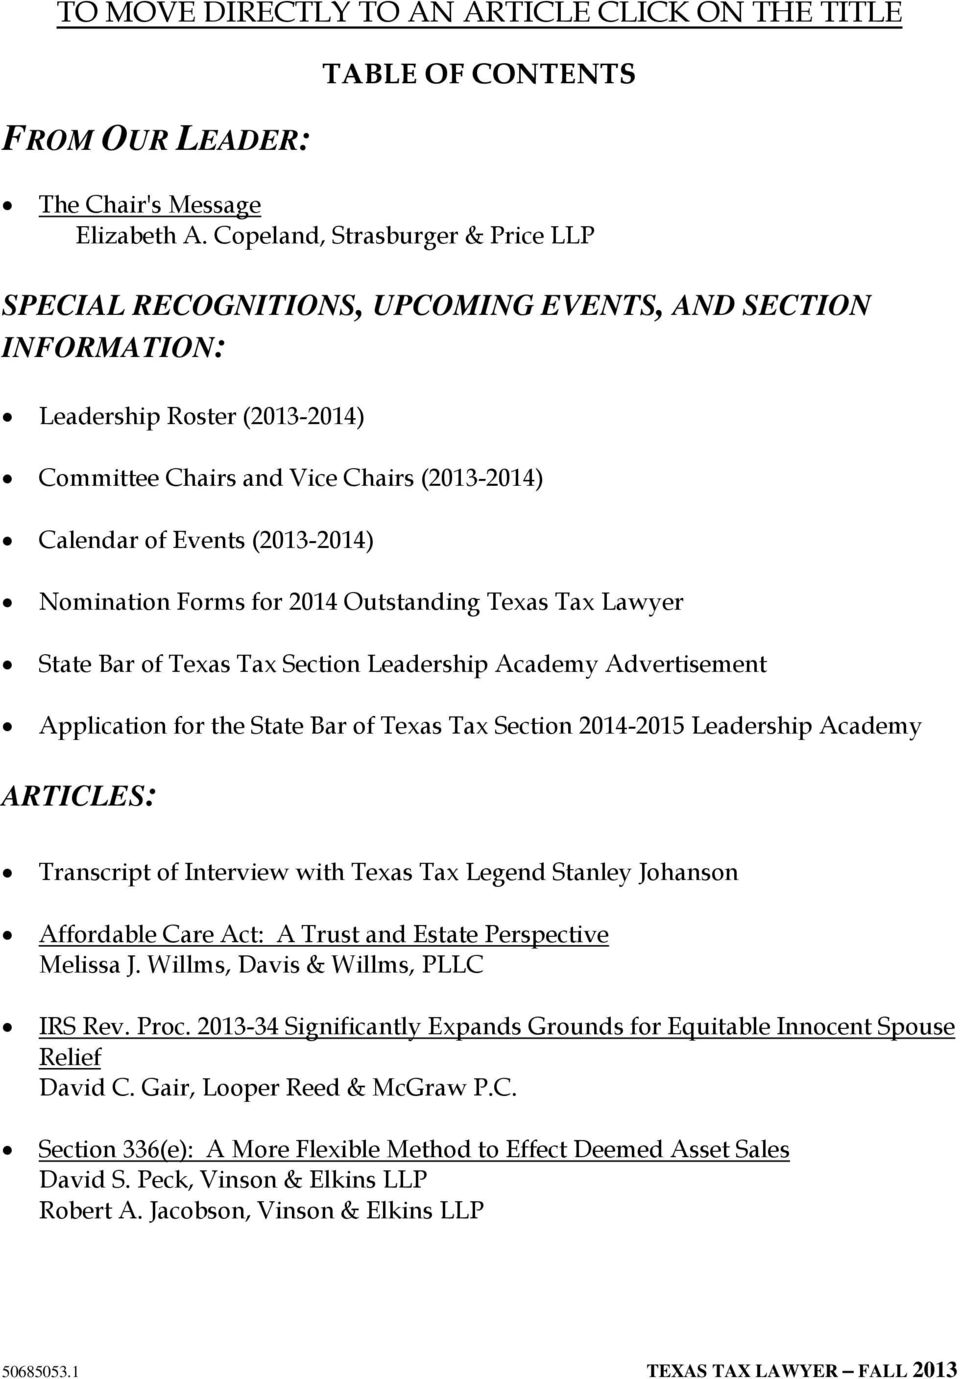 (2013-2014) Nomination Forms for 2014 Outstanding Texas Tax Lawyer State Bar of Texas Tax Section Leadership Academy Advertisement Application for the State Bar of Texas Tax Section 2014-2015